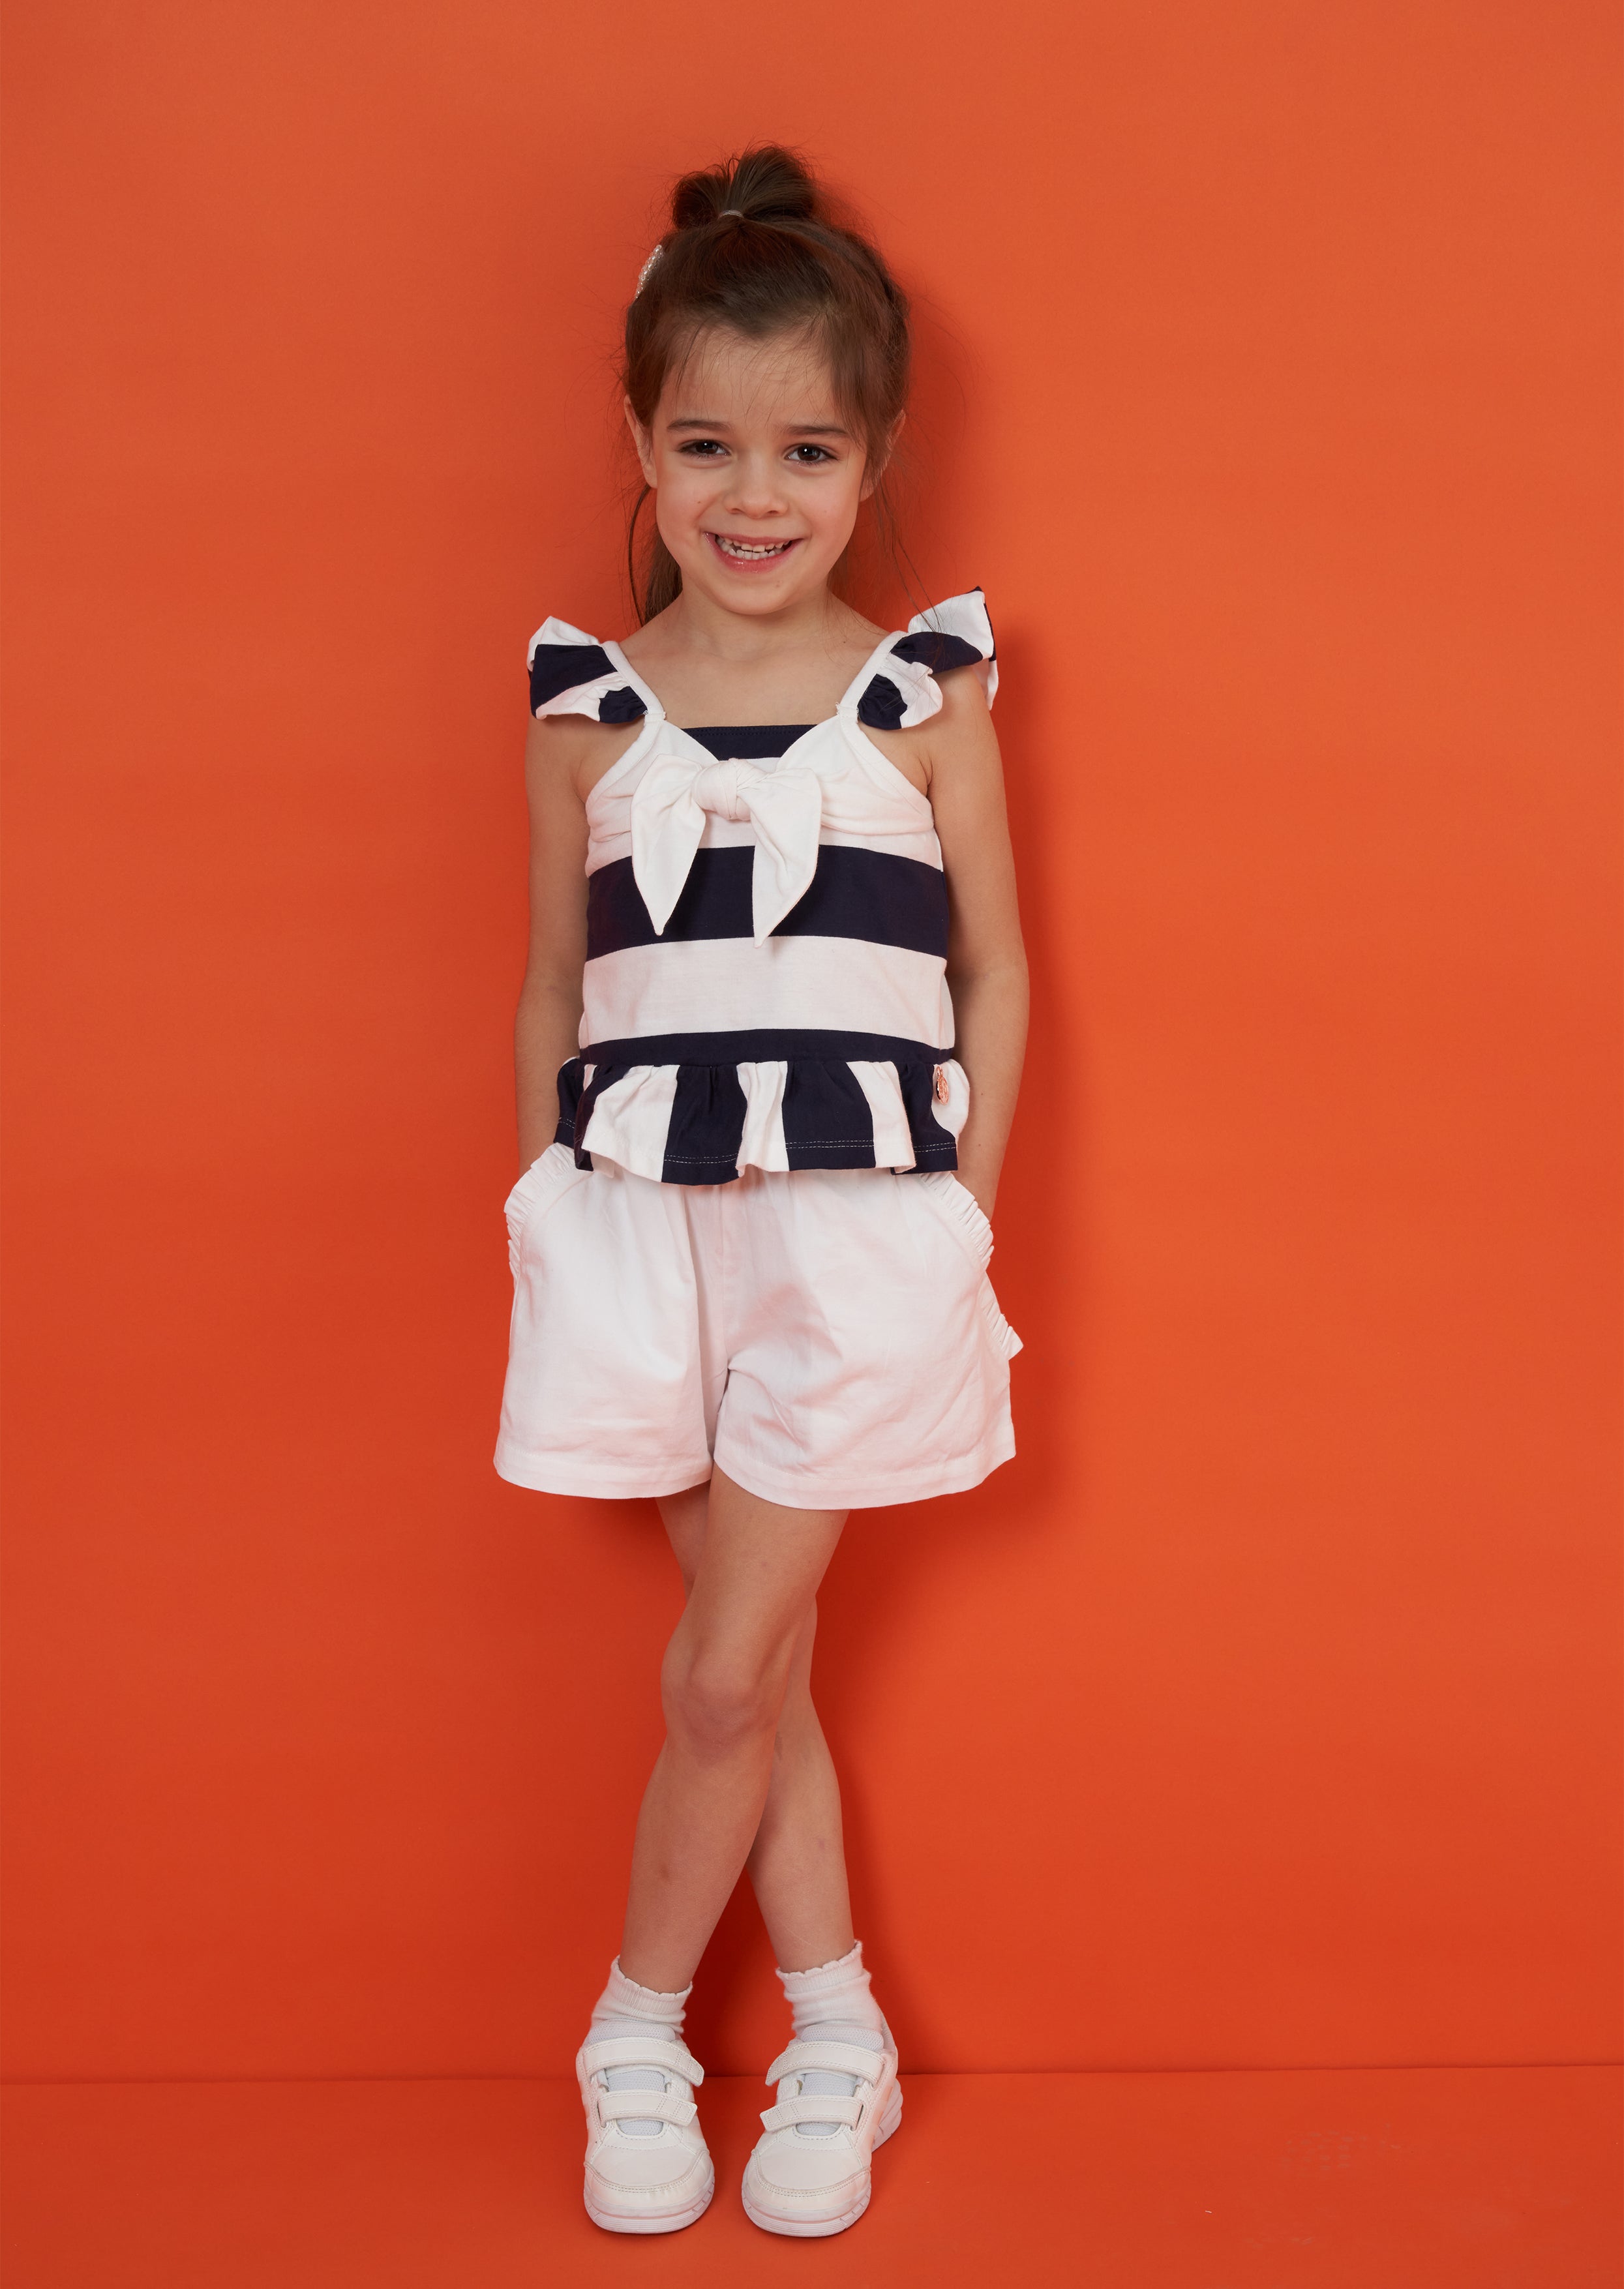 Girls White and Navy Striped Cotton Top